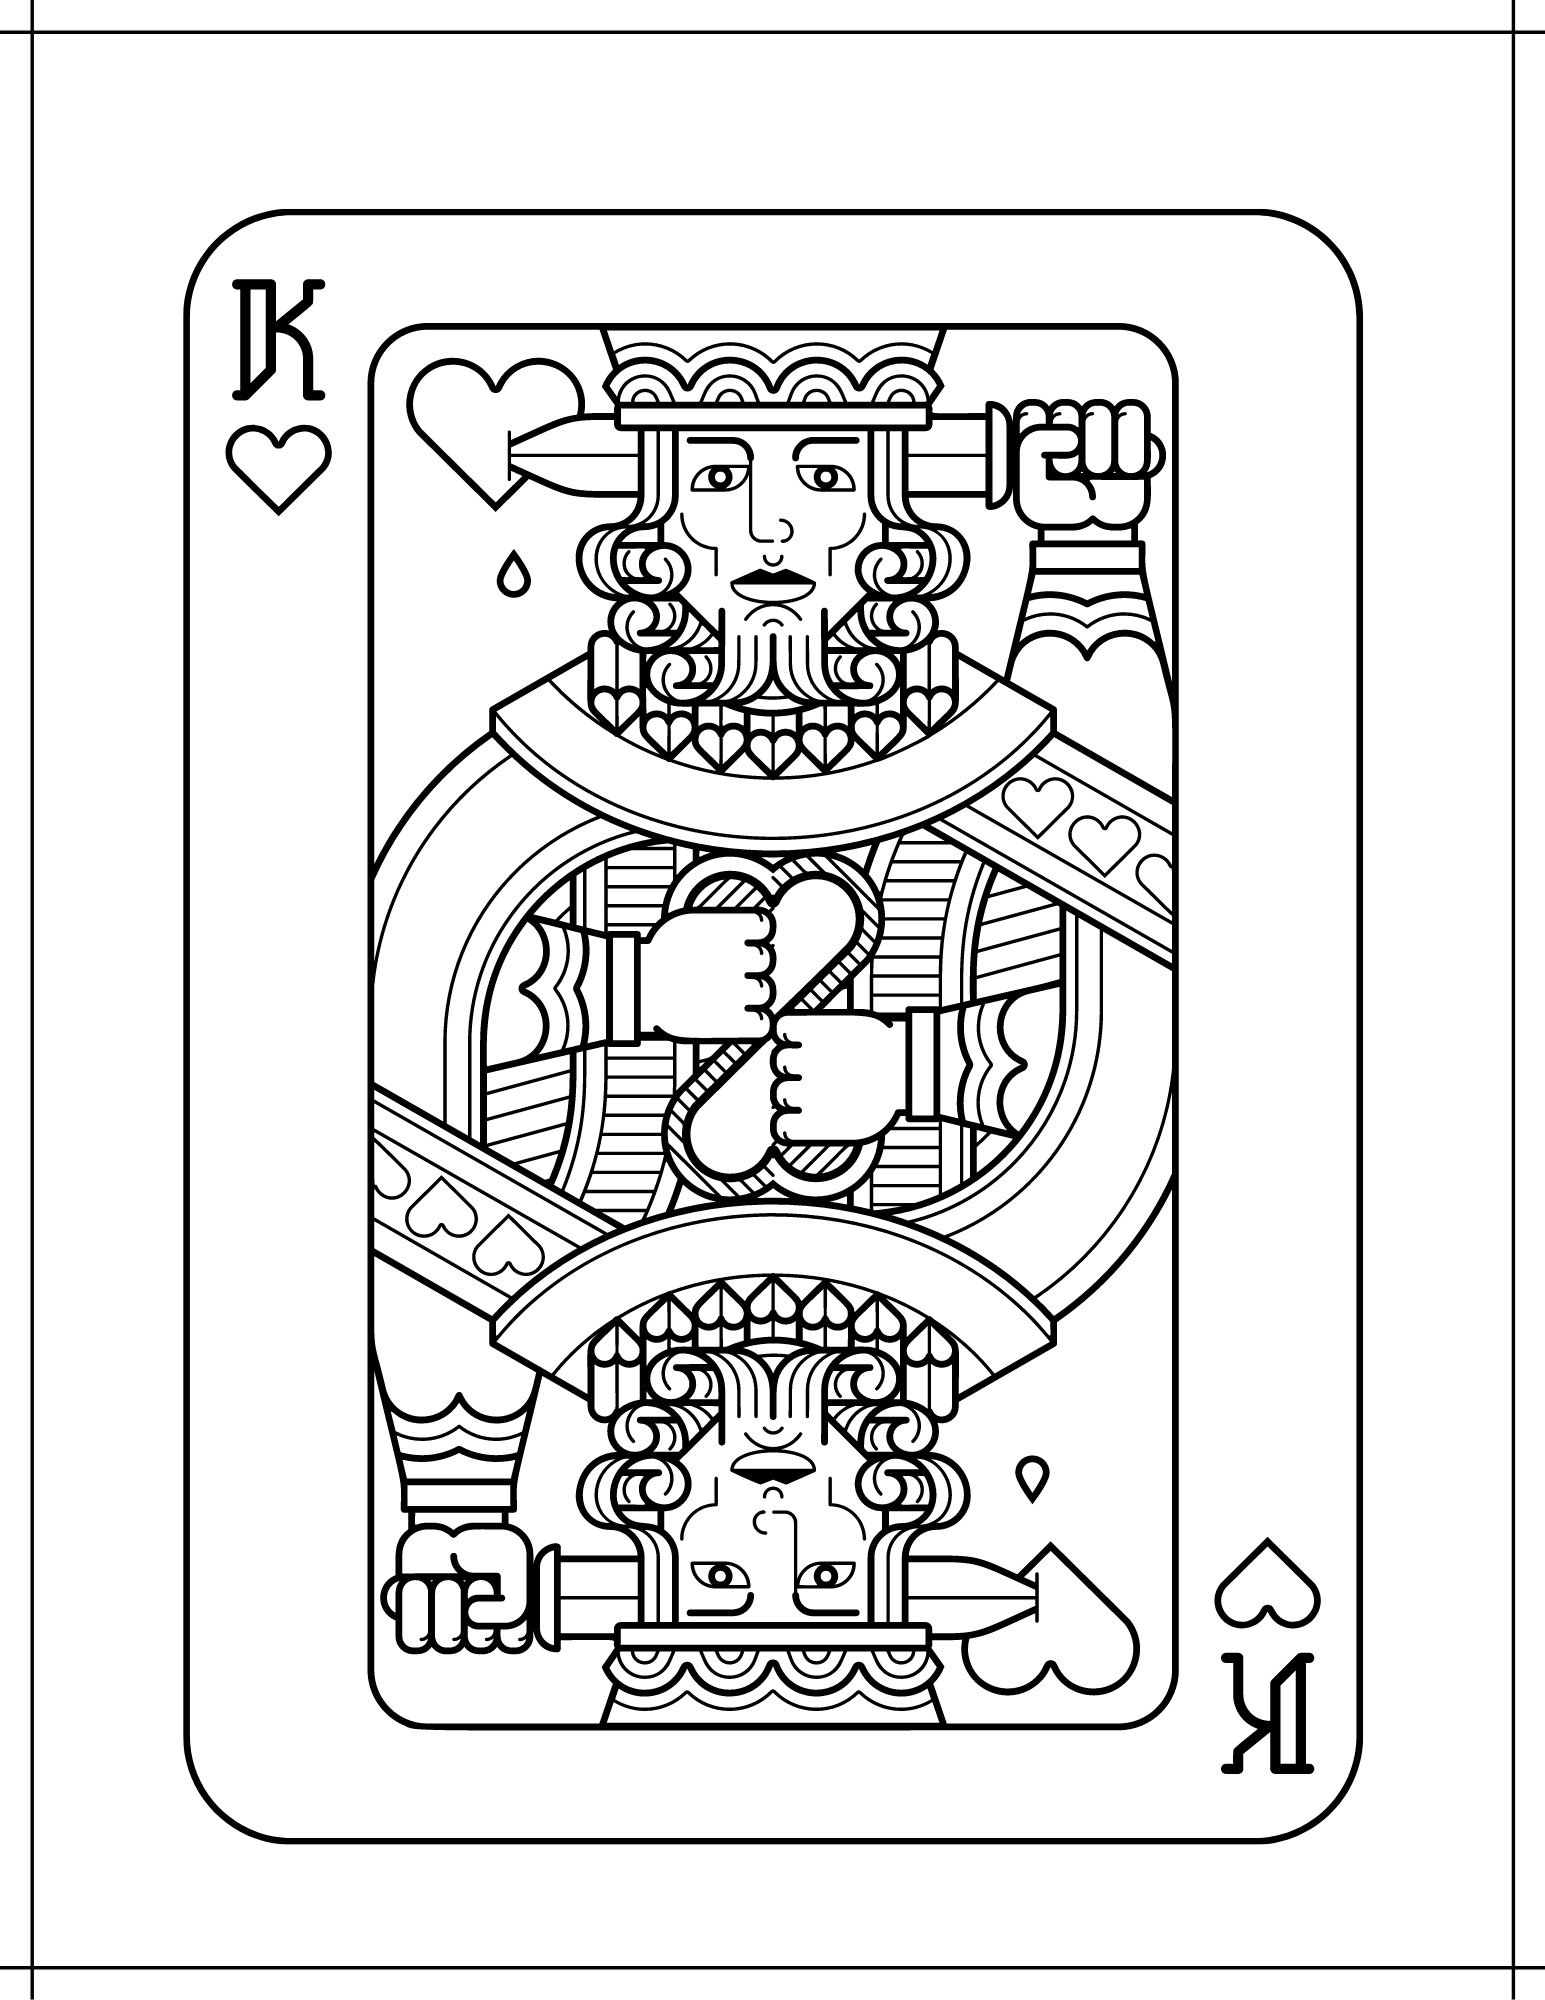 Face cards coloring pages plusface cards to colorplaying cardscard games for kids instant download